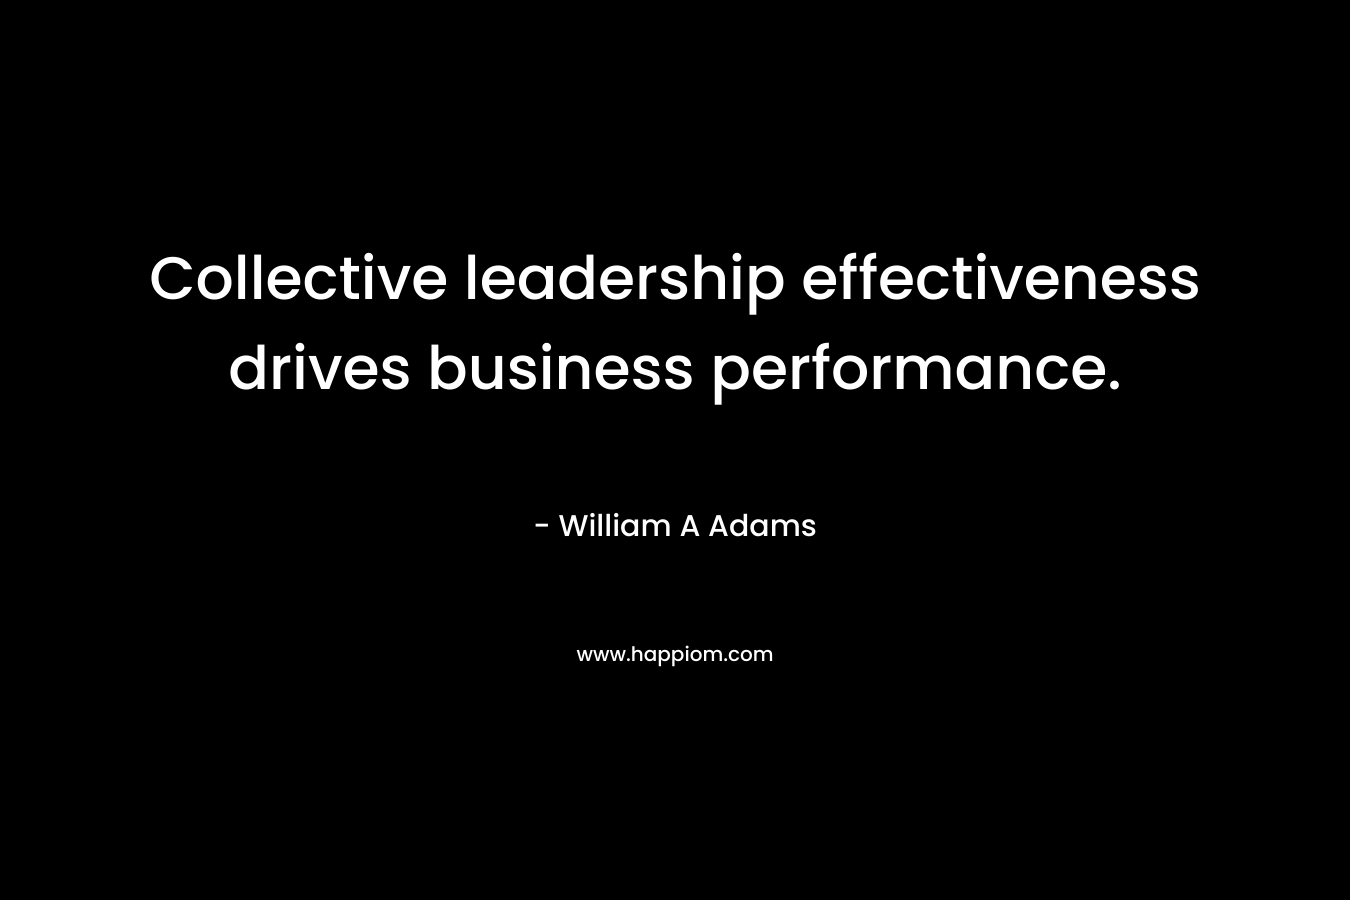 Collective leadership effectiveness drives business performance.